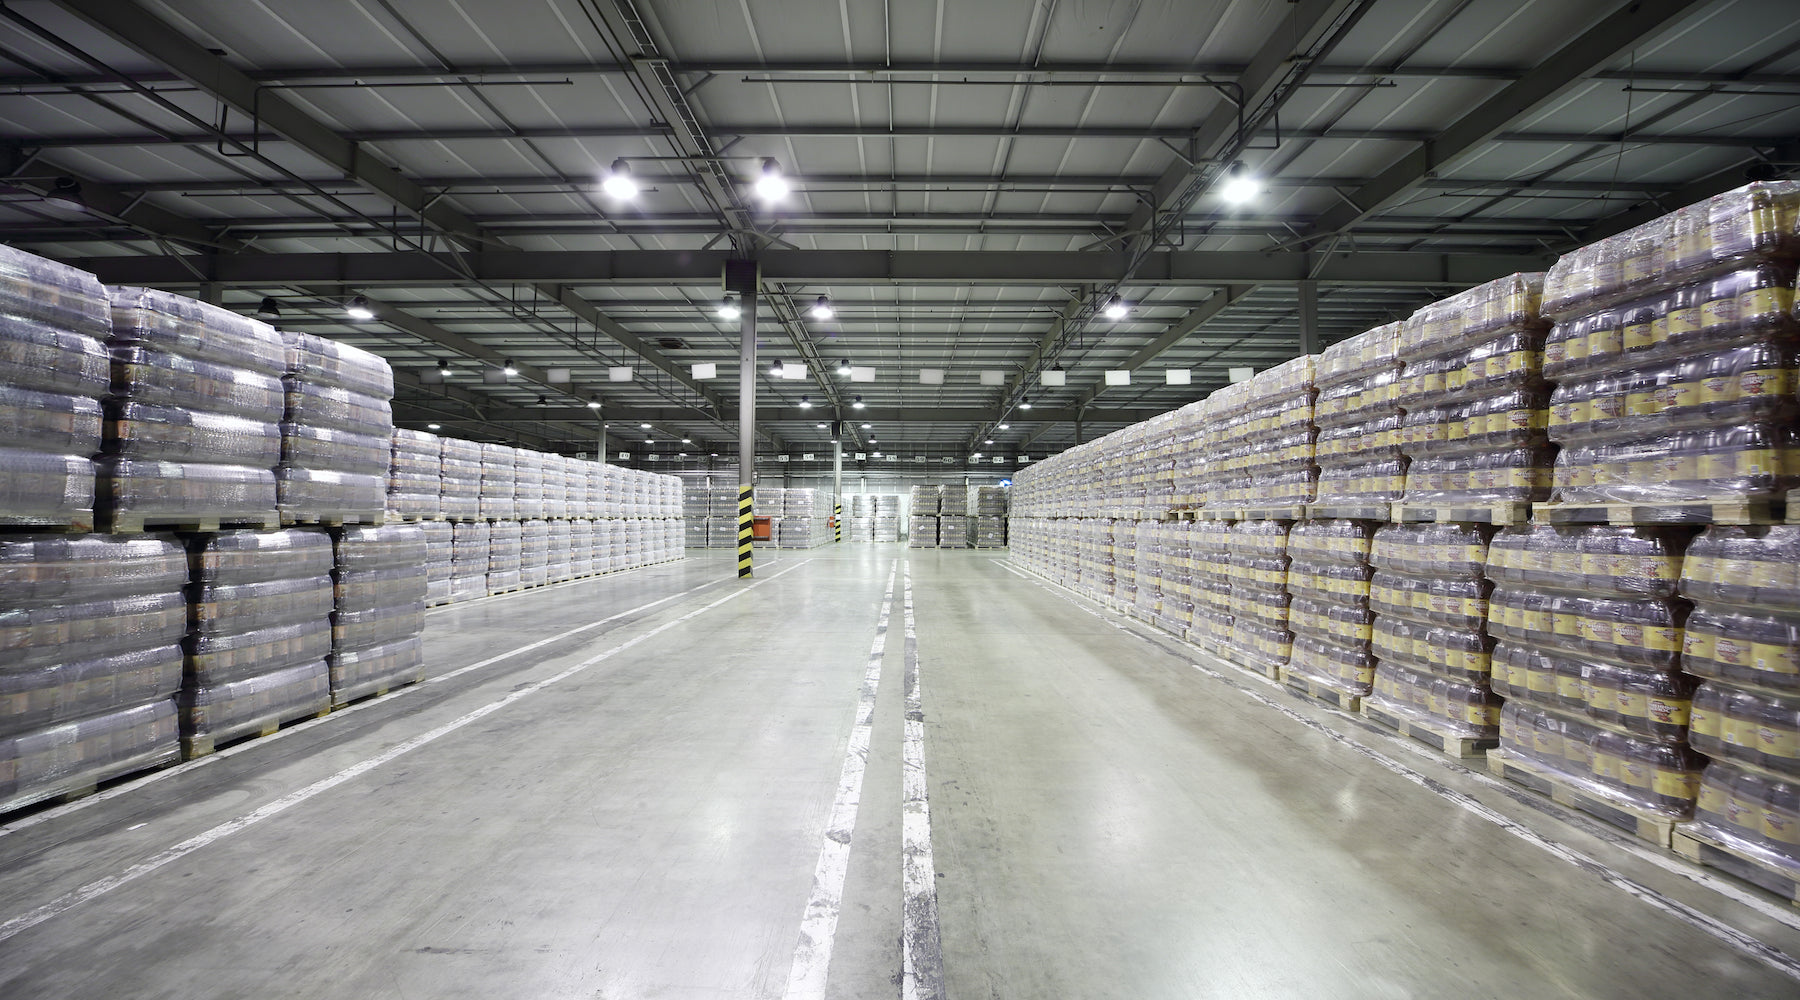 Warehouse lighting installed in large warehouse area storing pallets of beer